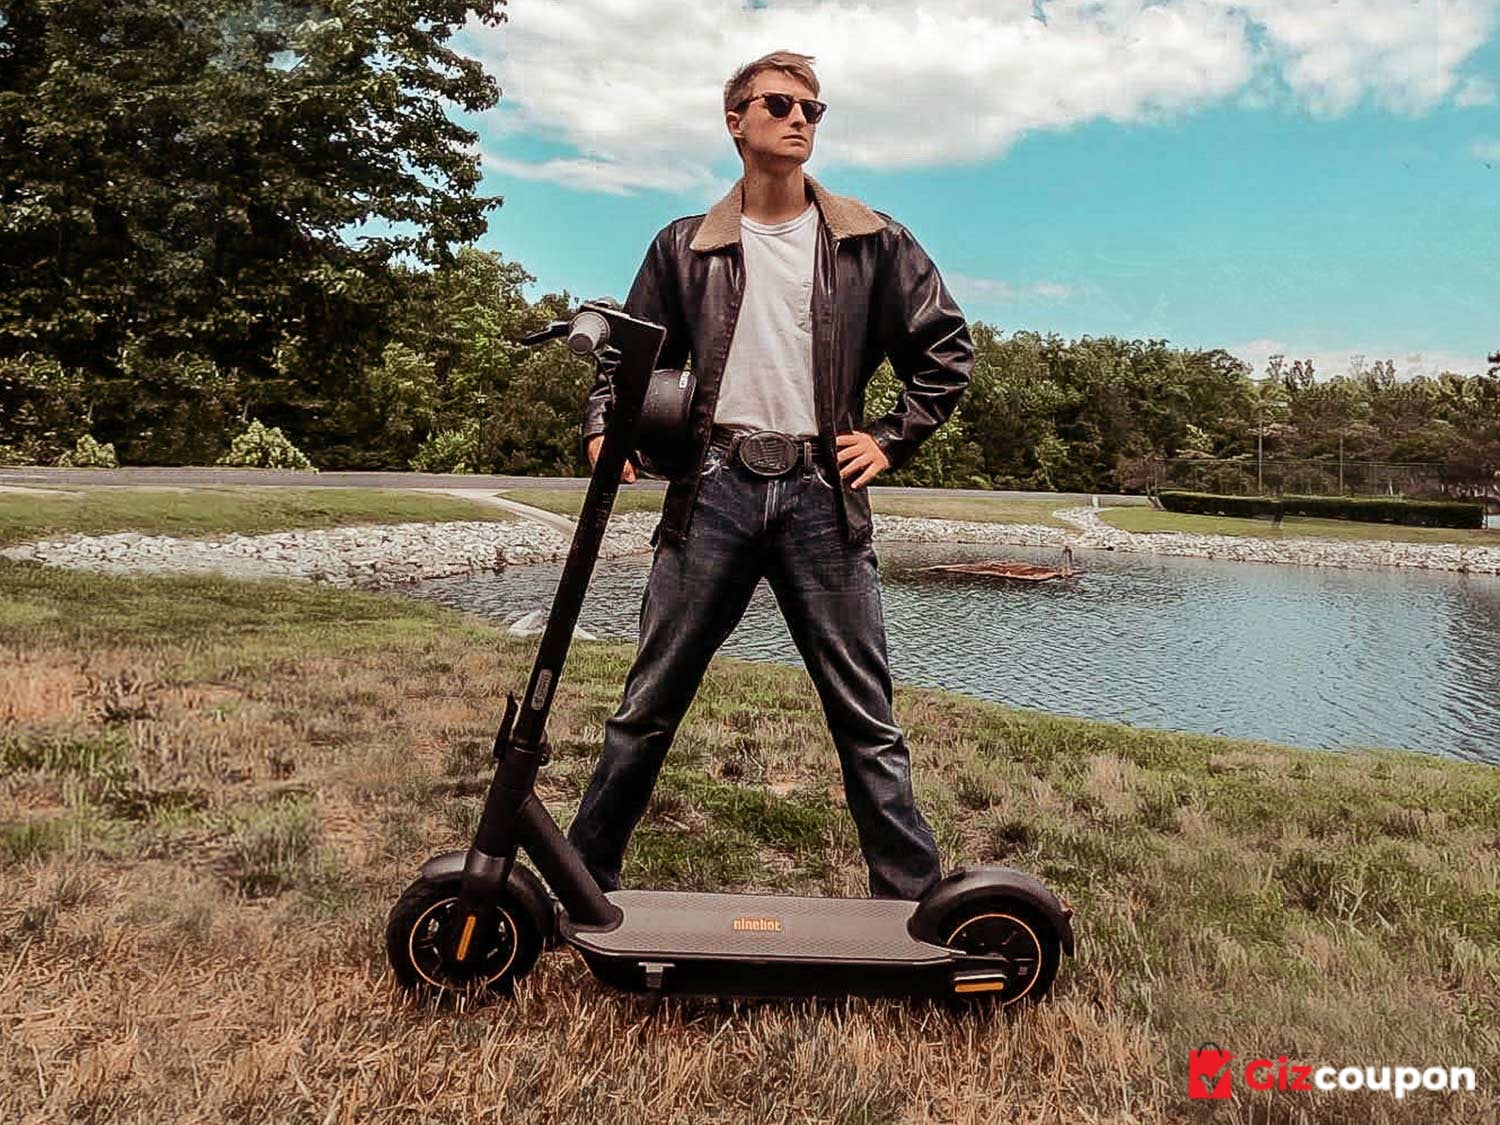 Ninebot G30P Max folding electric scooter